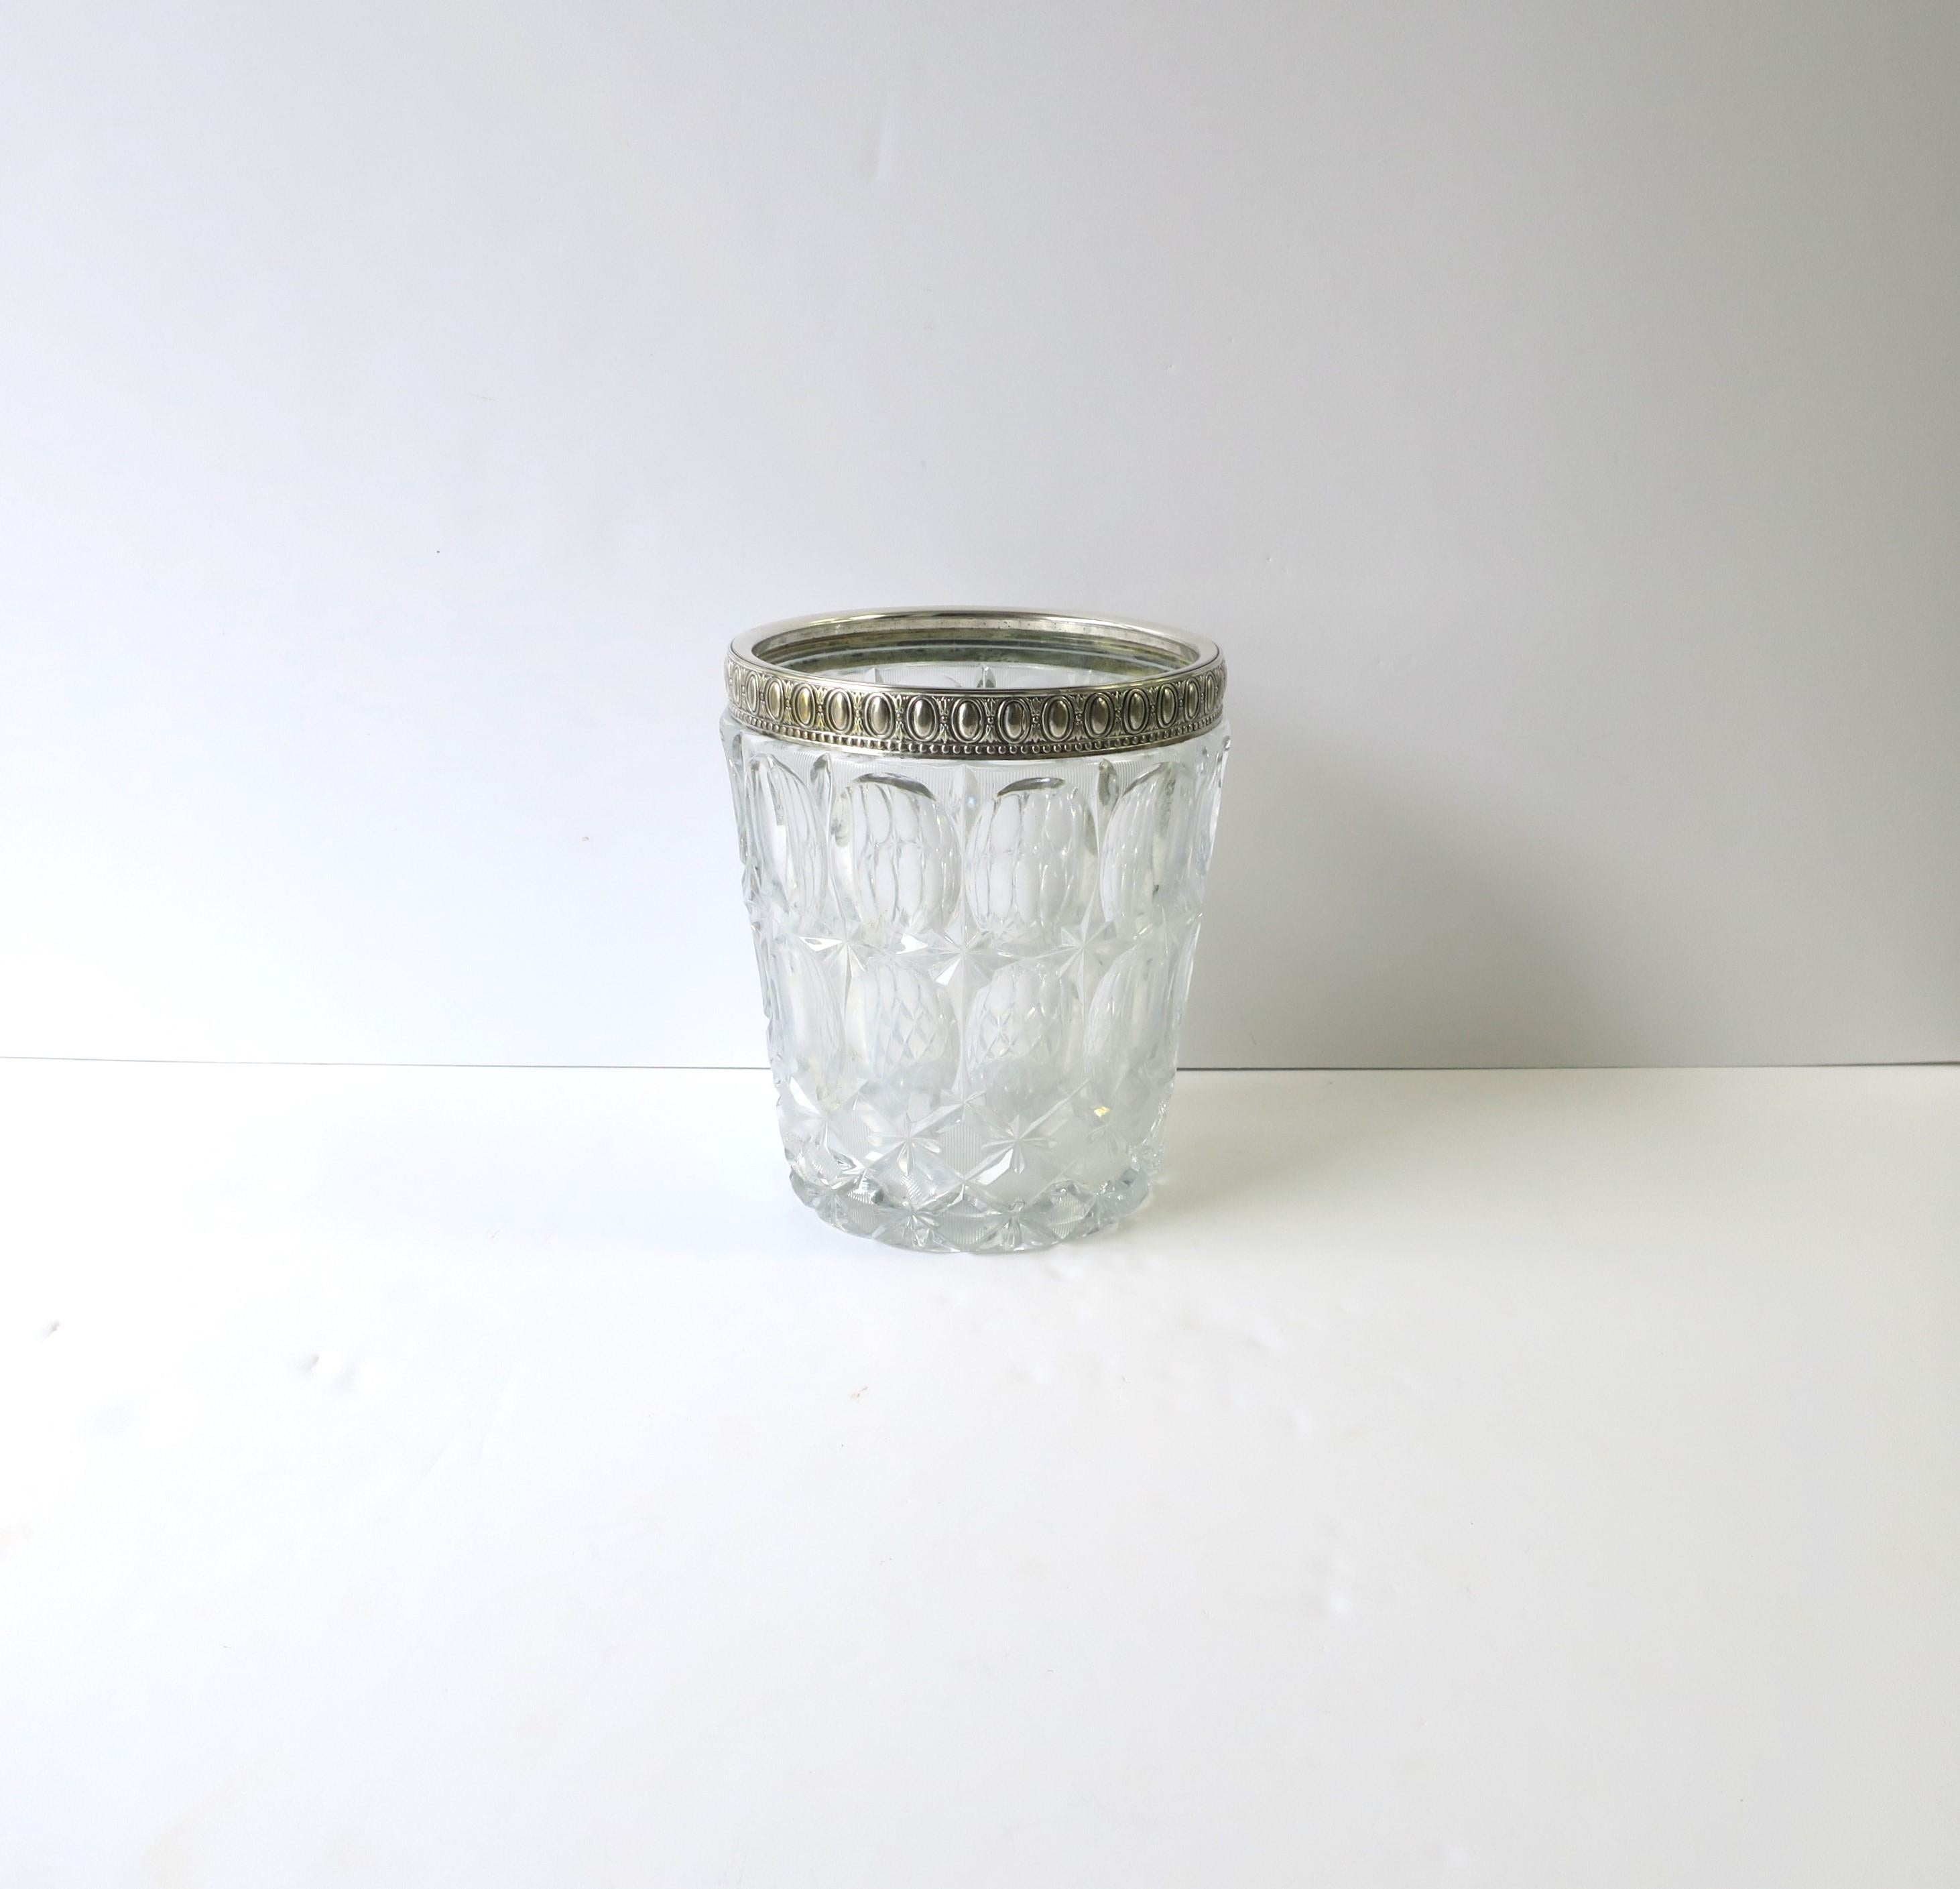 A substantial Bohemian cut crystal wine cooler or ice bucket, circa mid-20th century, Europe, Czechoslovakia. A heavy cut crystal wine/Champagne cooler or ice bucket with embossed metal rim (protection for crystal rim/edge.) A great piece for a bar,